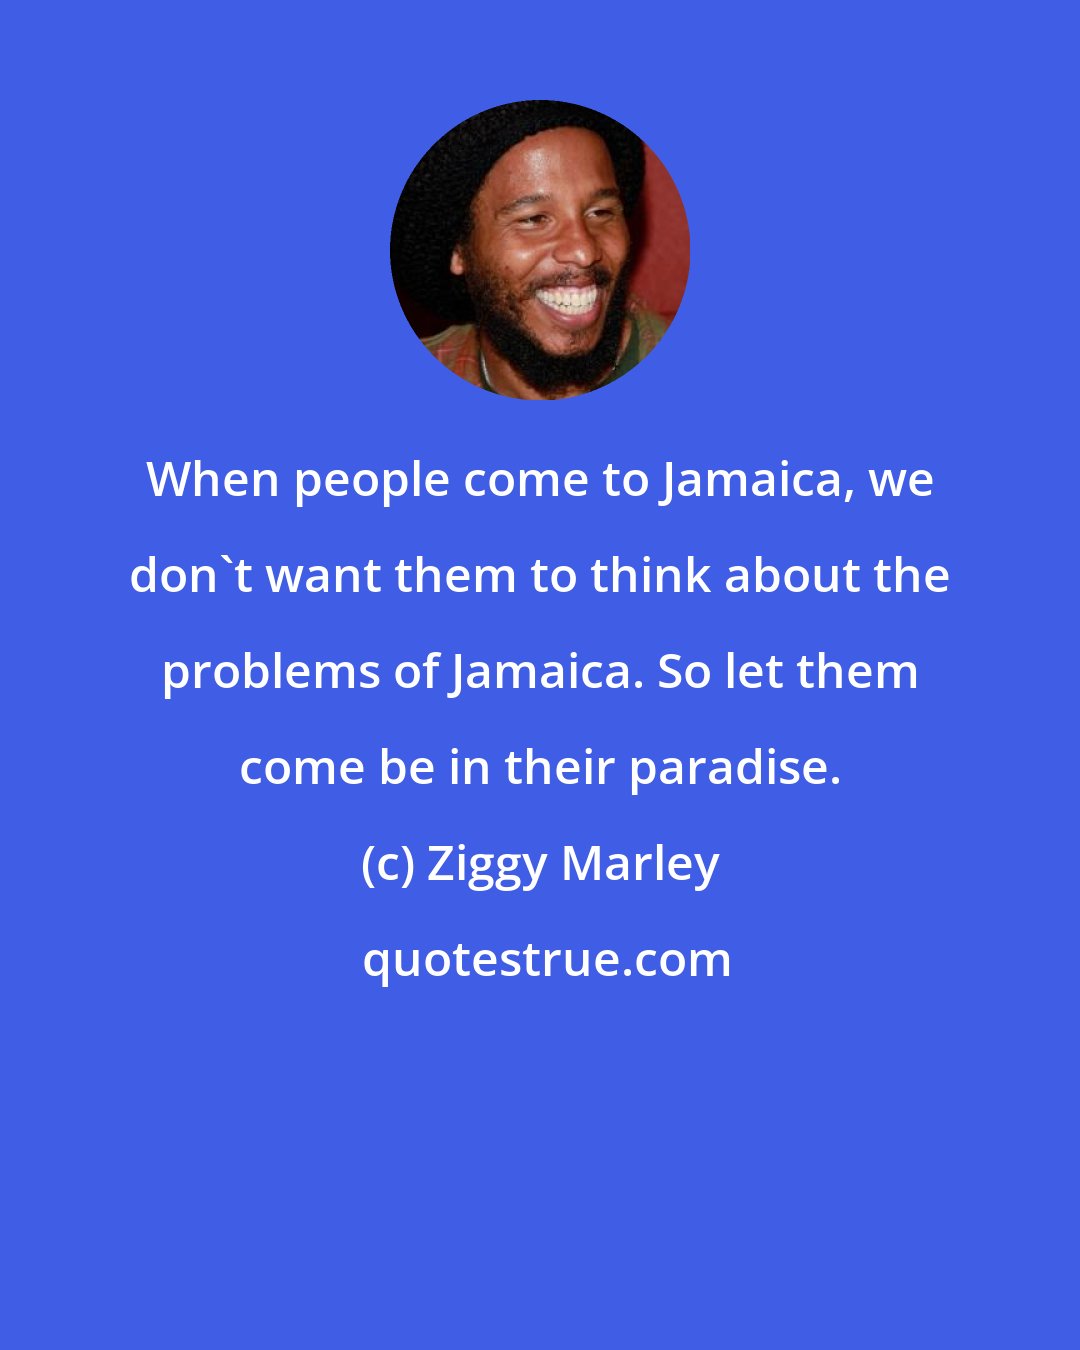 Ziggy Marley: When people come to Jamaica, we don't want them to think about the problems of Jamaica. So let them come be in their paradise.